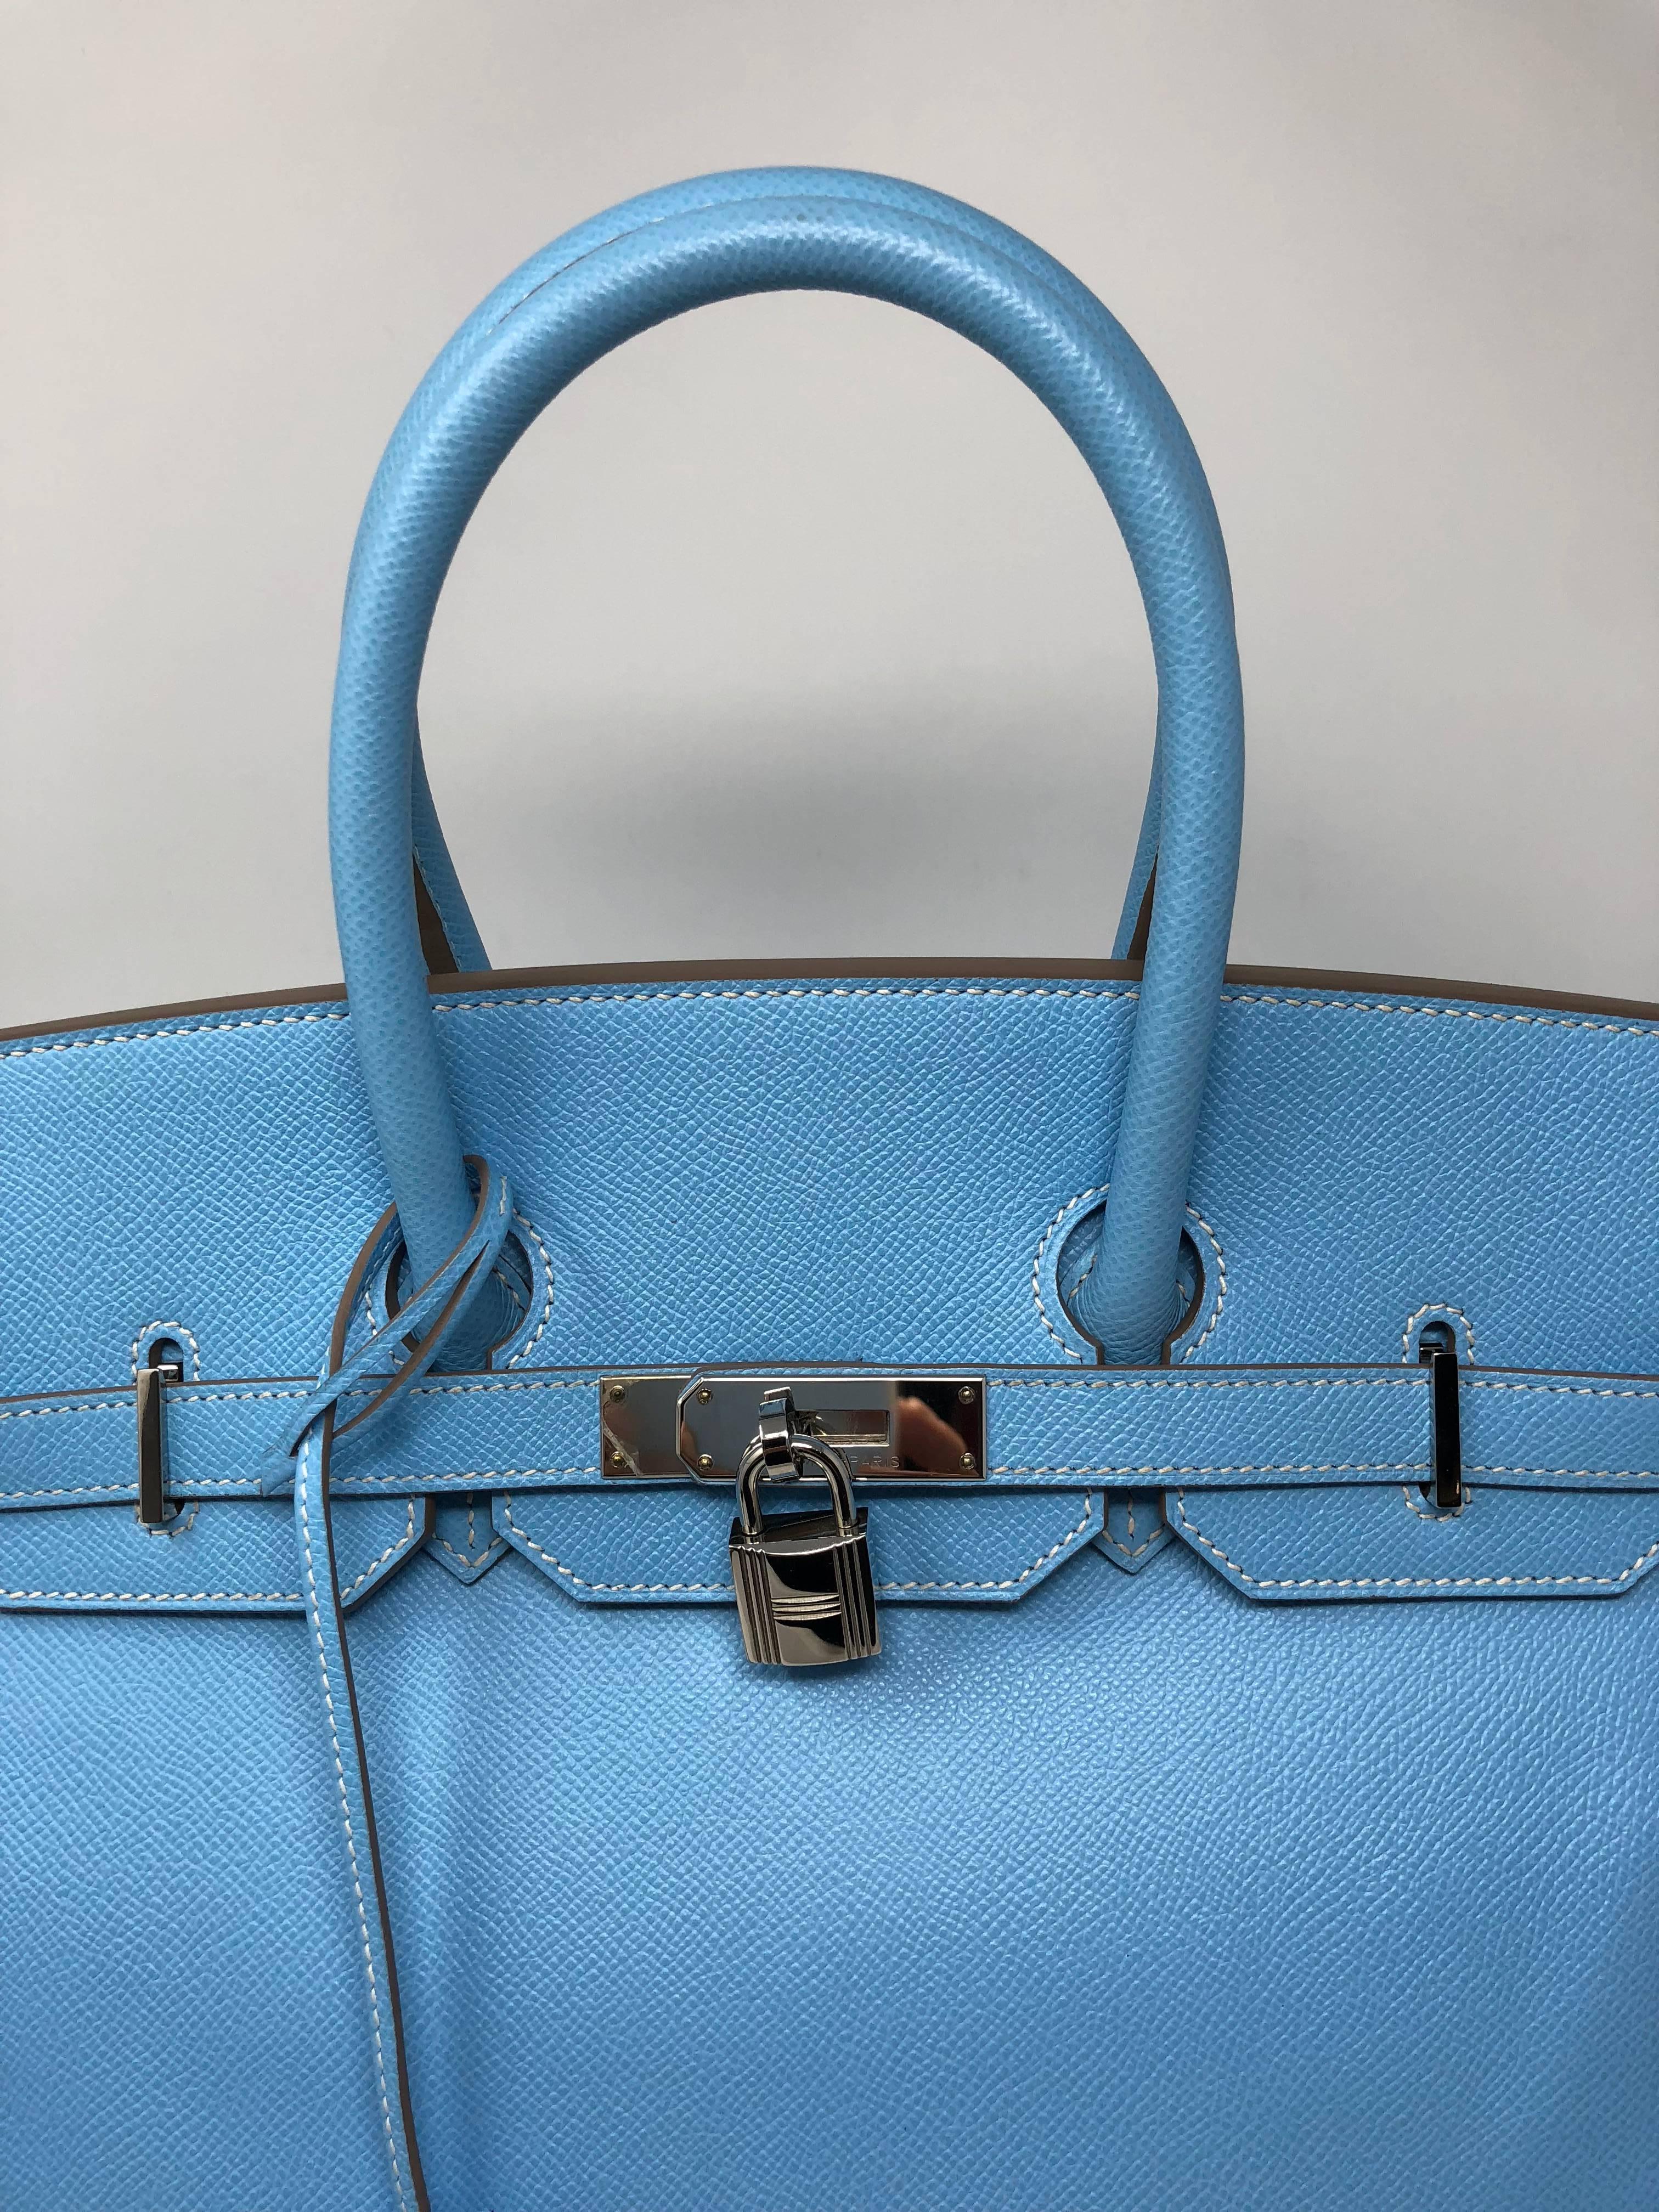 Hermes Birkin 35 (Candy edition) in Veau Epsom leather. Color Celeste blue exterior and interior Mykonos blue. Palladium hardware. Mint conditon like new. From 2011 (O square). Comes with clochette, keys, and dust cover. Guaranteed authentic. 